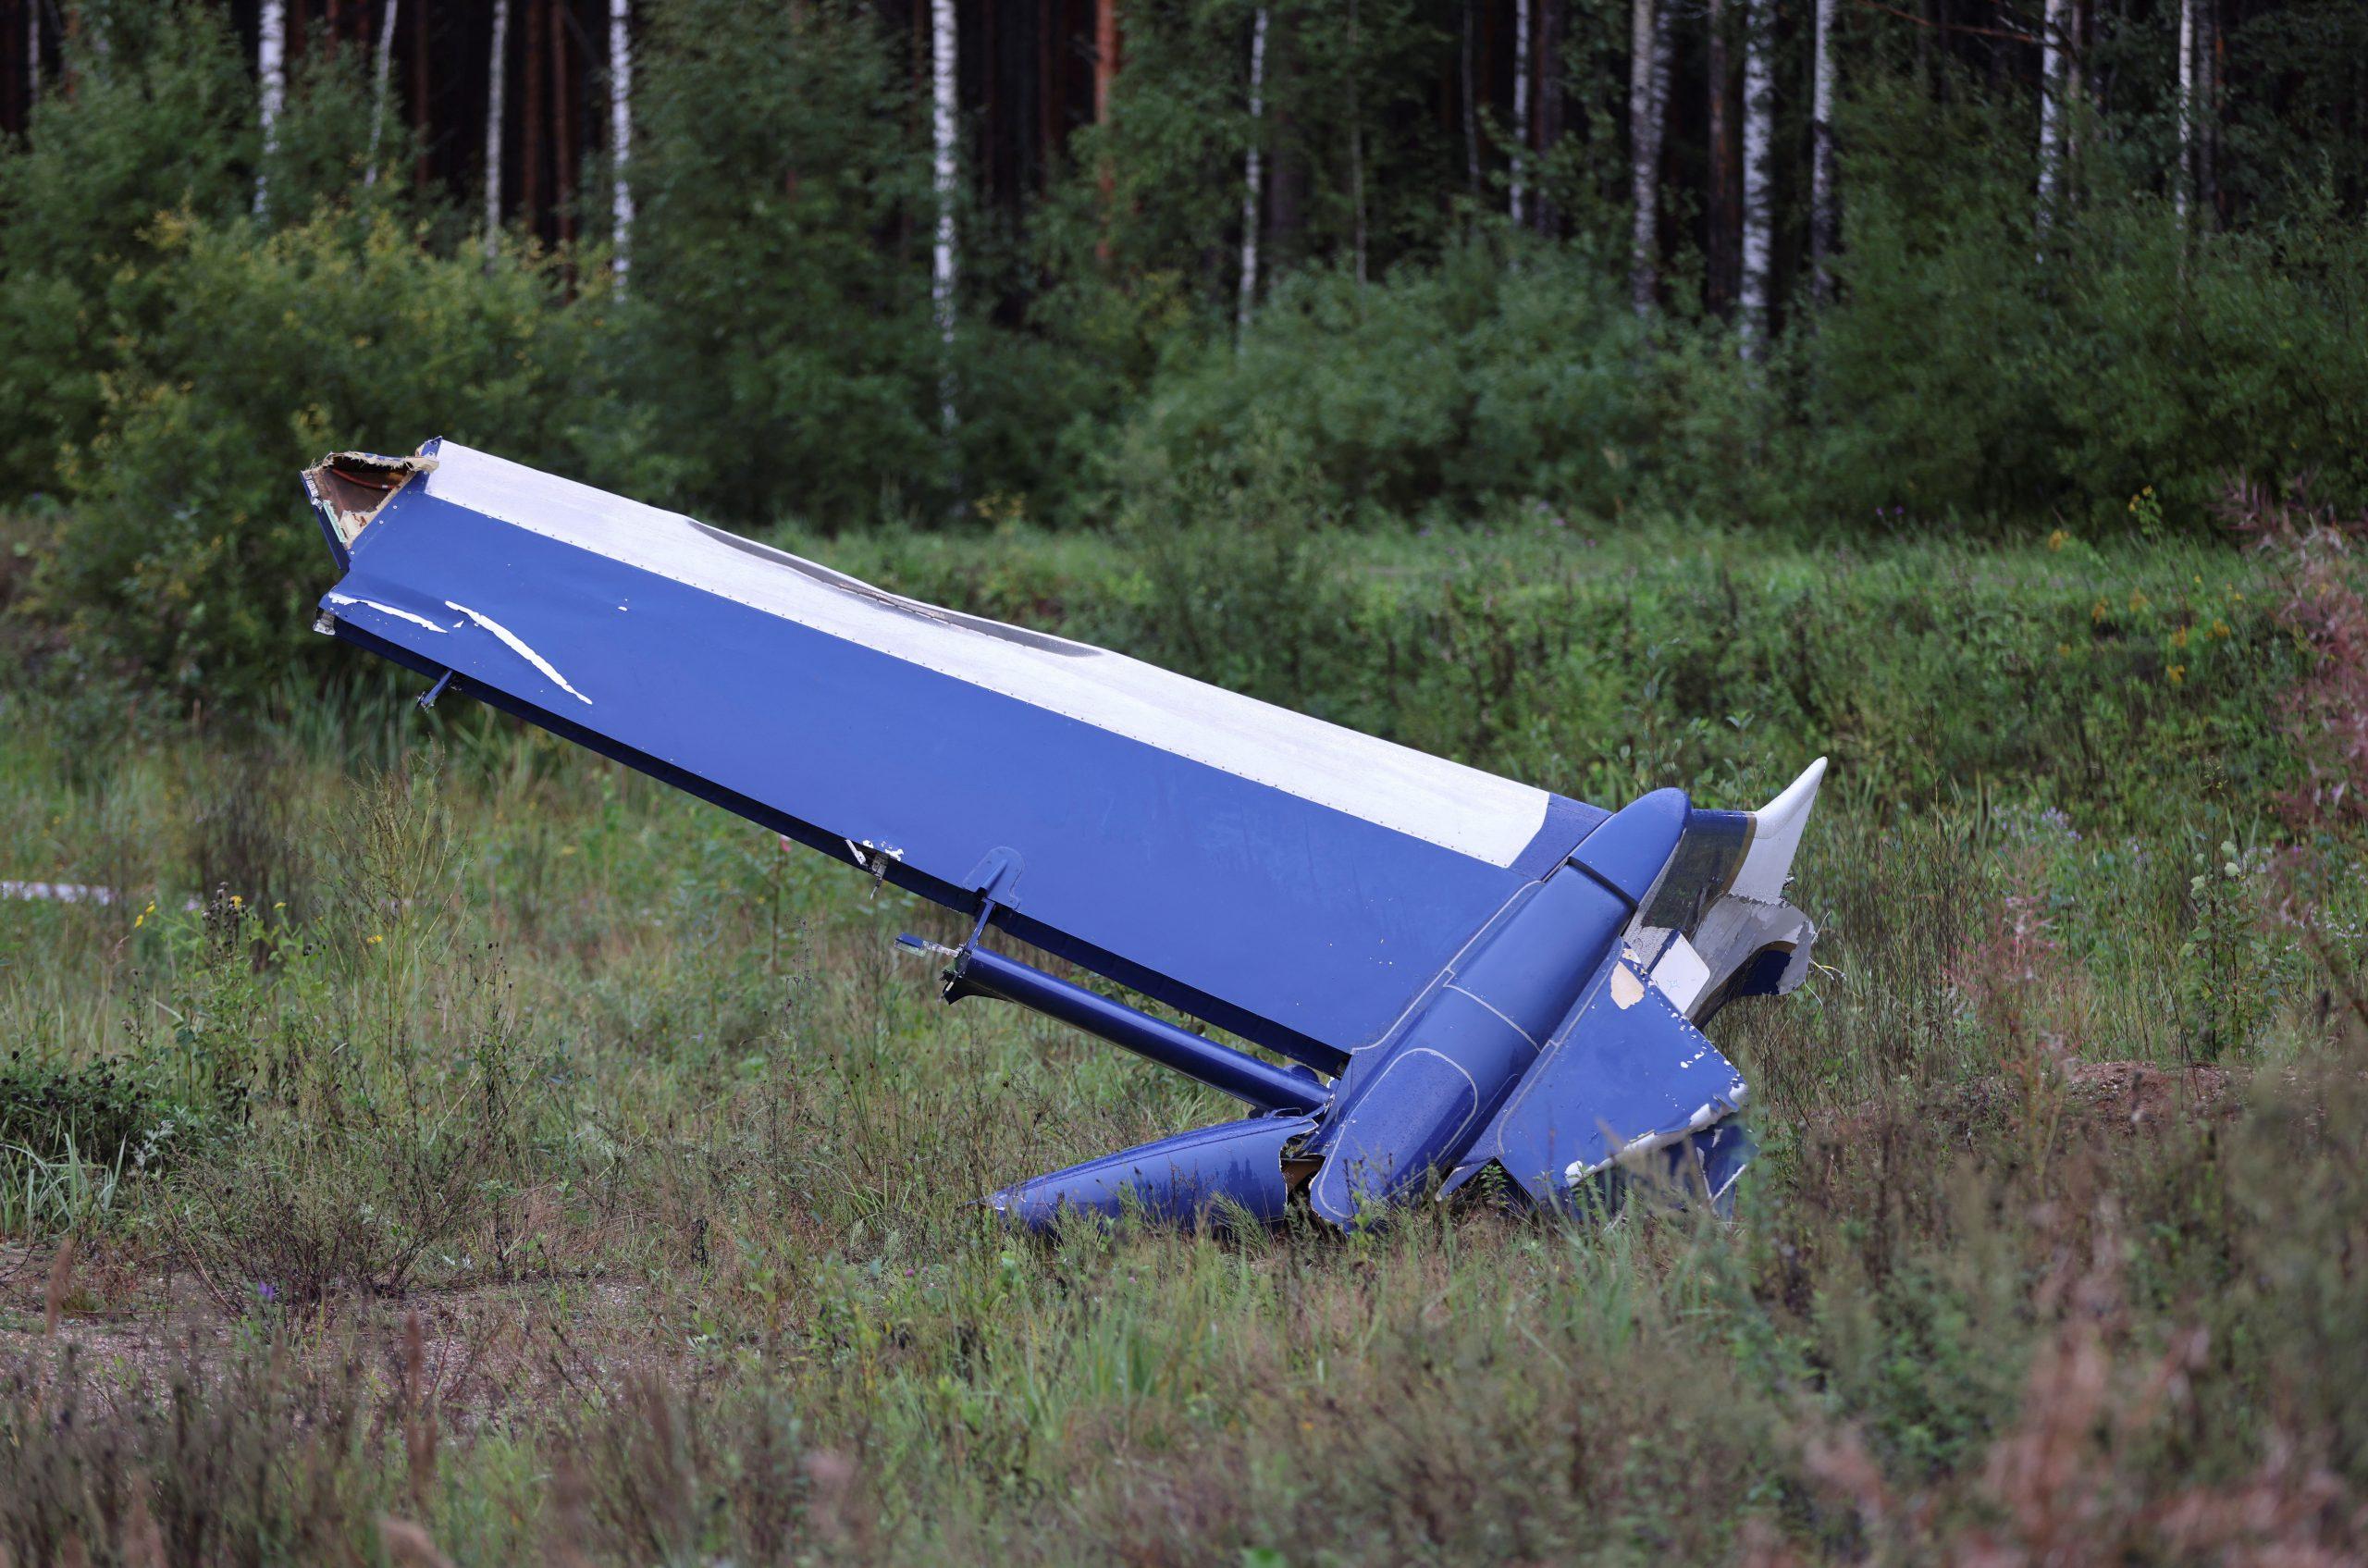 Yevgeny Prigozhin plane crash: Villagers see plane plummet, then "everything was on fire" | Reuters